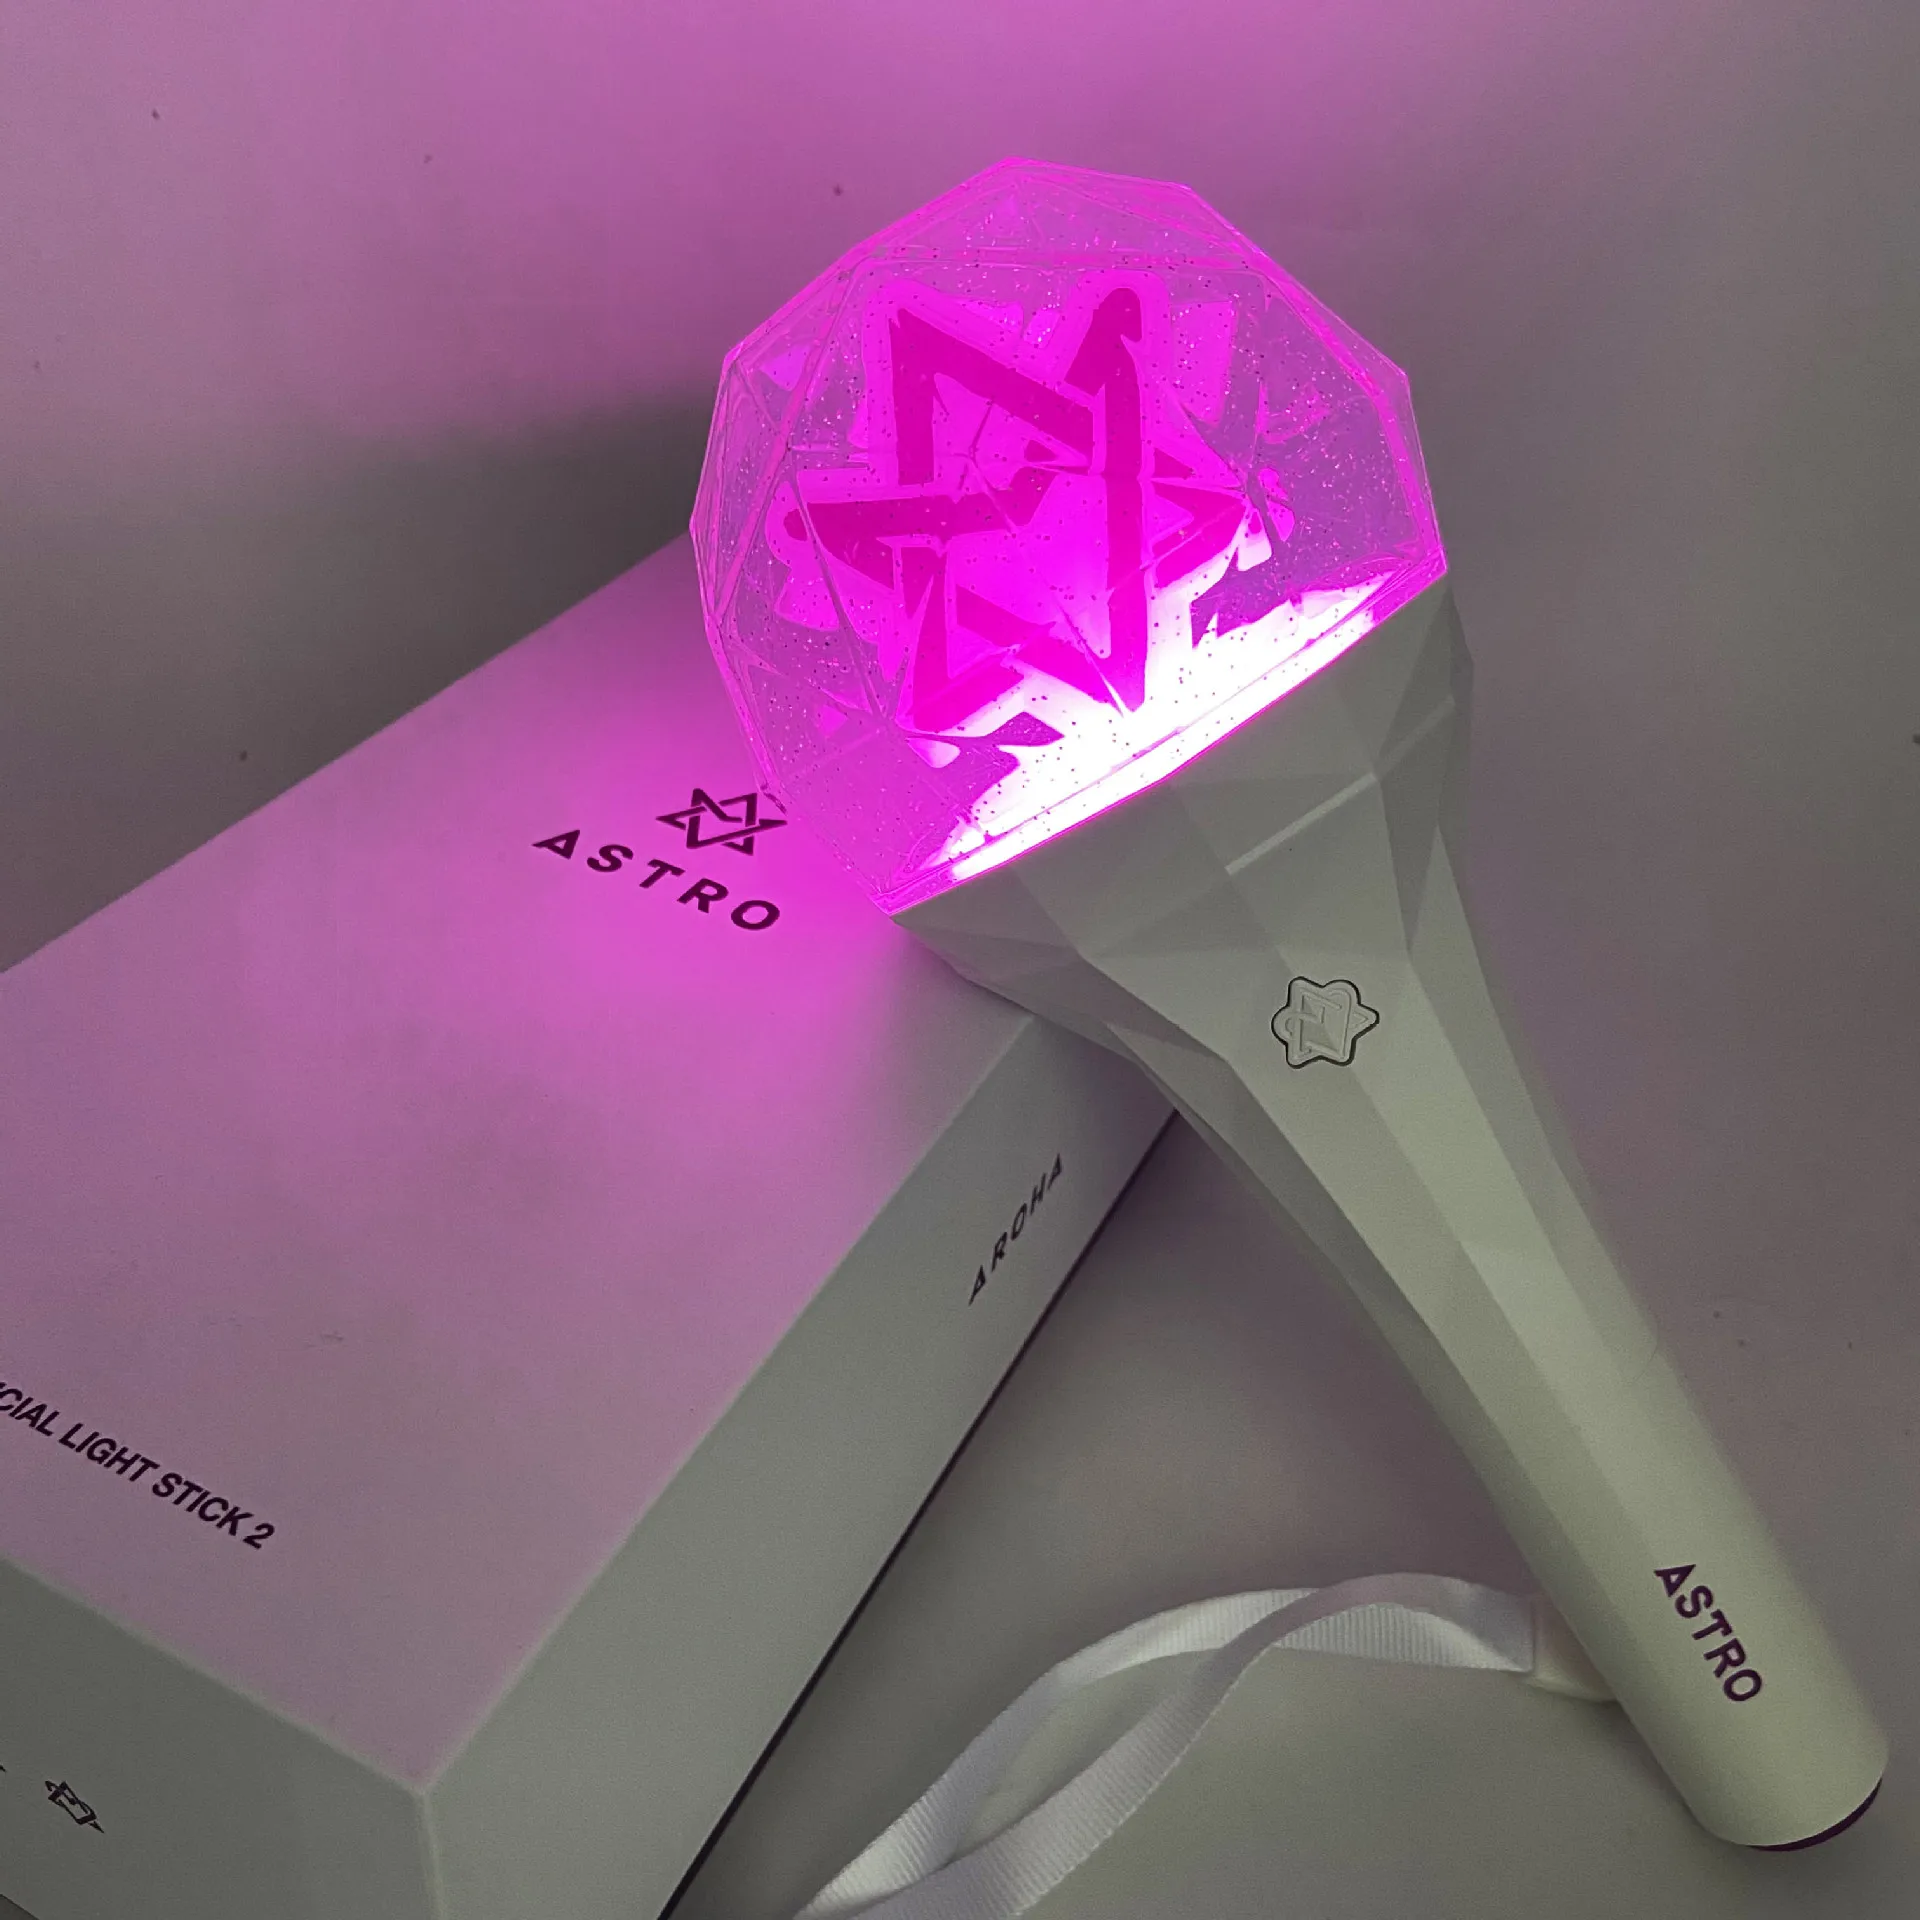 astro-light-stick-gidle-fan-stick-castle-lights-cheer-props-fans-concerts-must-for-star-chasing-glowing-toys-concert-perim